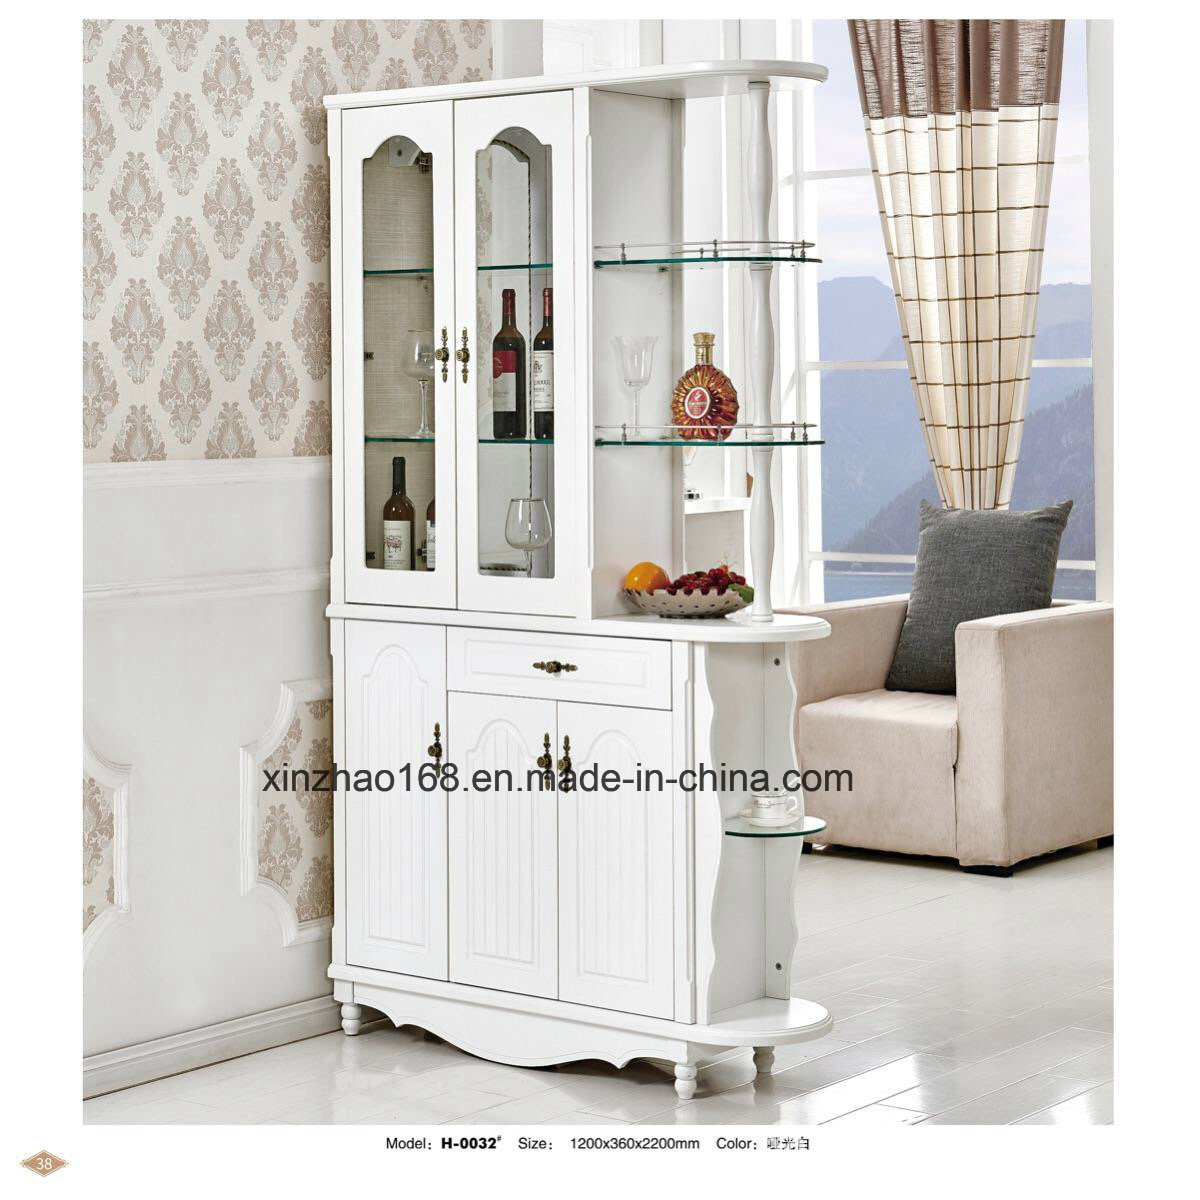 /proimages/2f0j00PEyYueTzsLqs/manufacturer-supply-low-price-all-kinds-of-wooden-shoe-cabinet.jpg